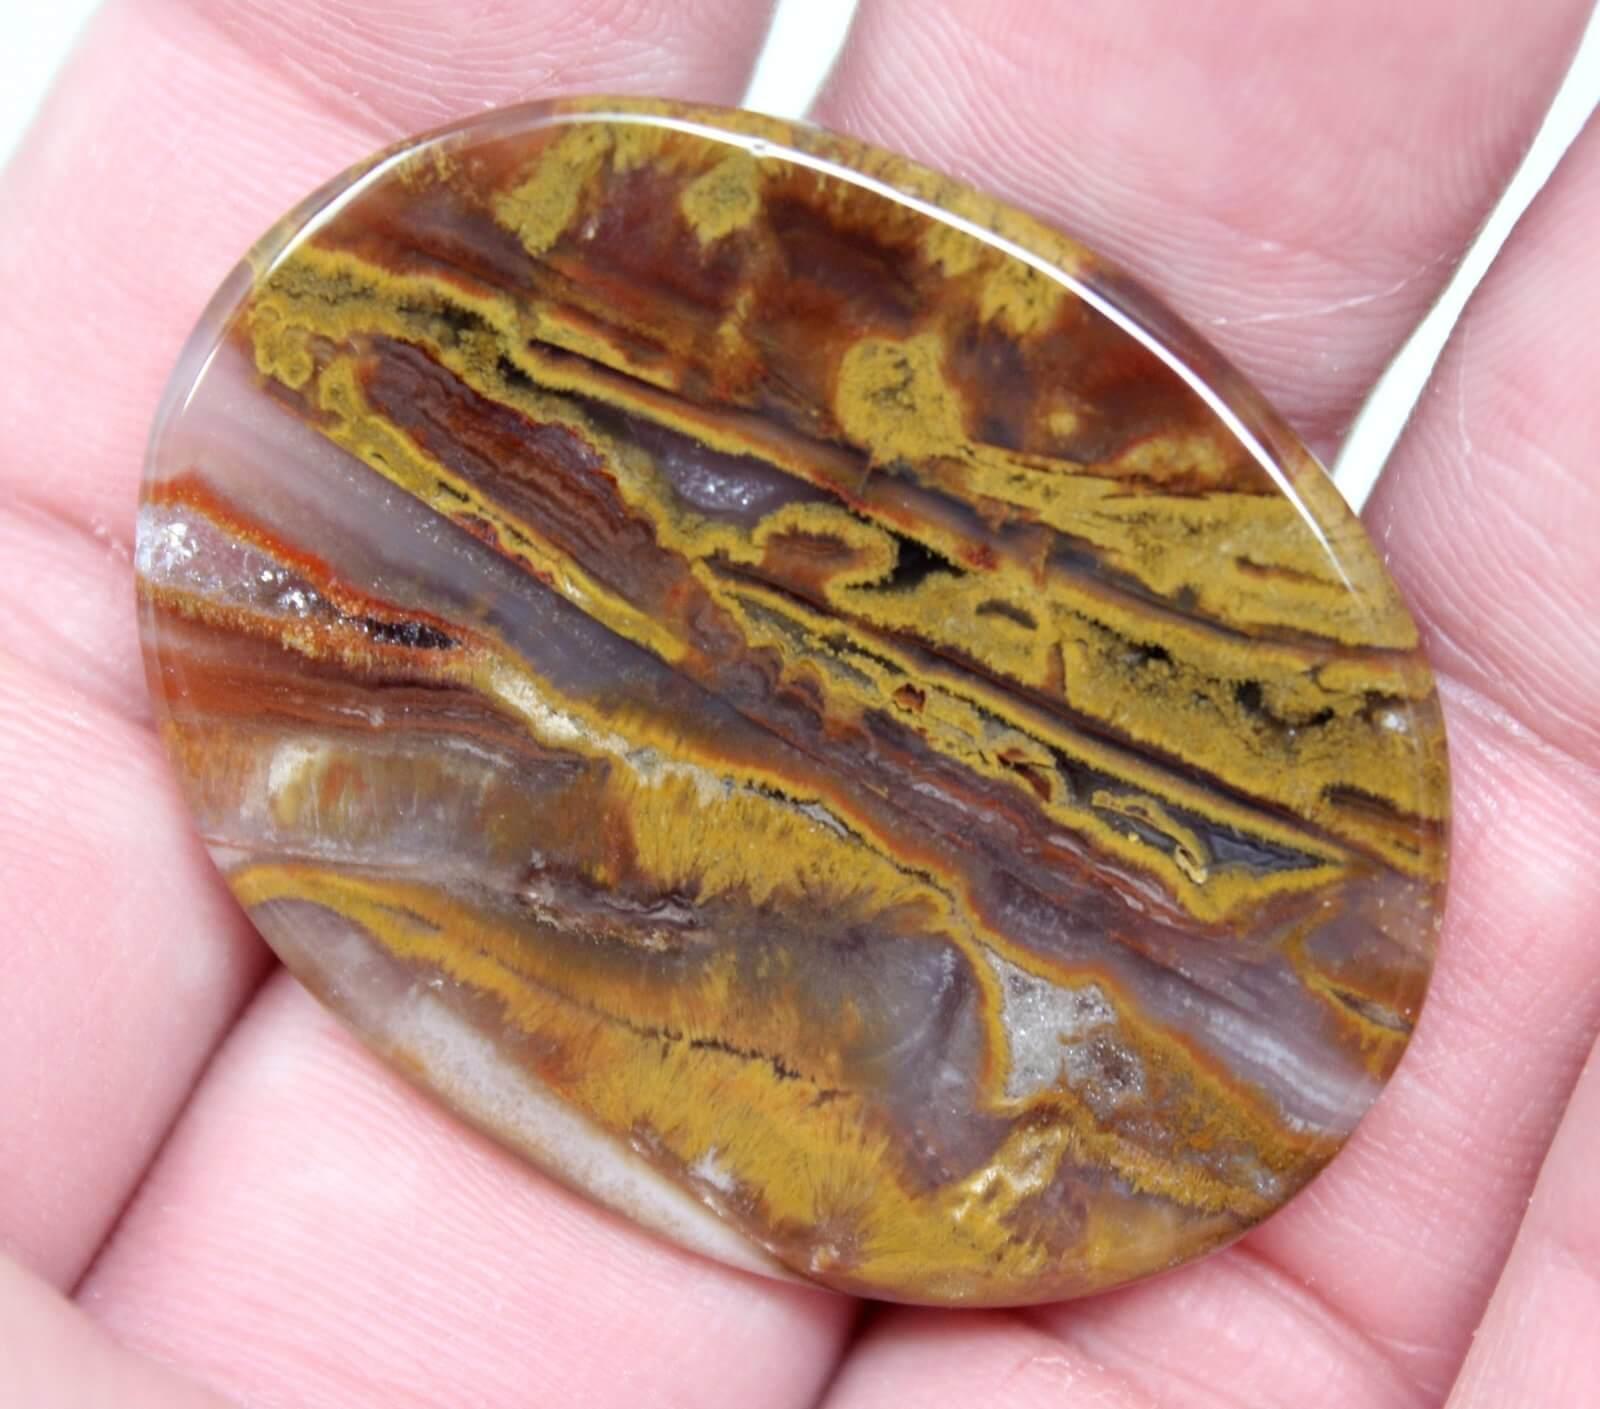 Indonesian Ocean Jasper Fossil Palm Root Cabochon! - LapidaryCentral